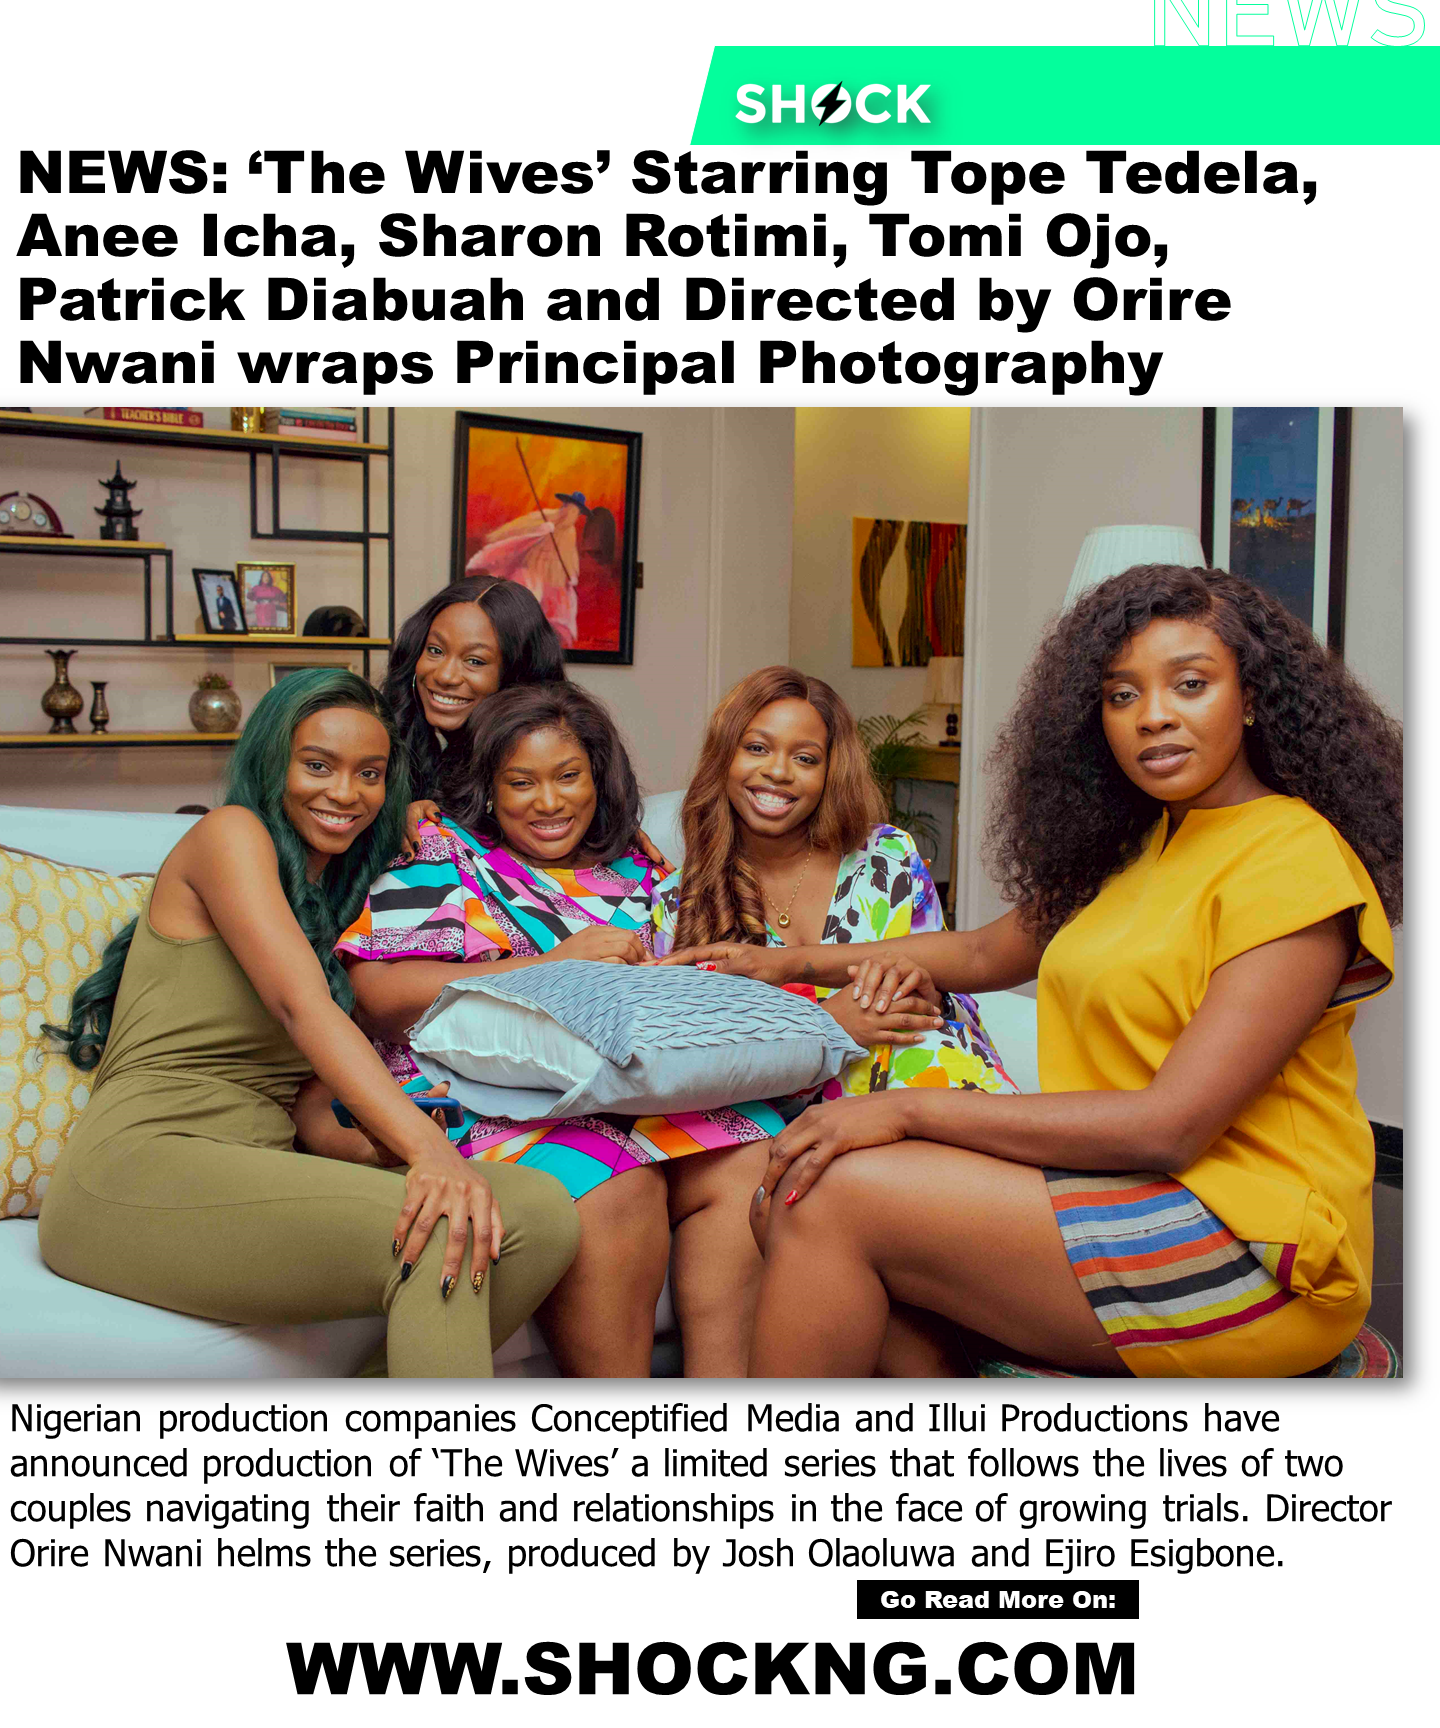 The wives new nigerian series - ‘The Wives’ Starring Tope Tedela, Anee Icha, Sharon Rotimi, Tomi Ojo, Patrick Diabuah and Directed by Orire Nwani wraps Principal Photography